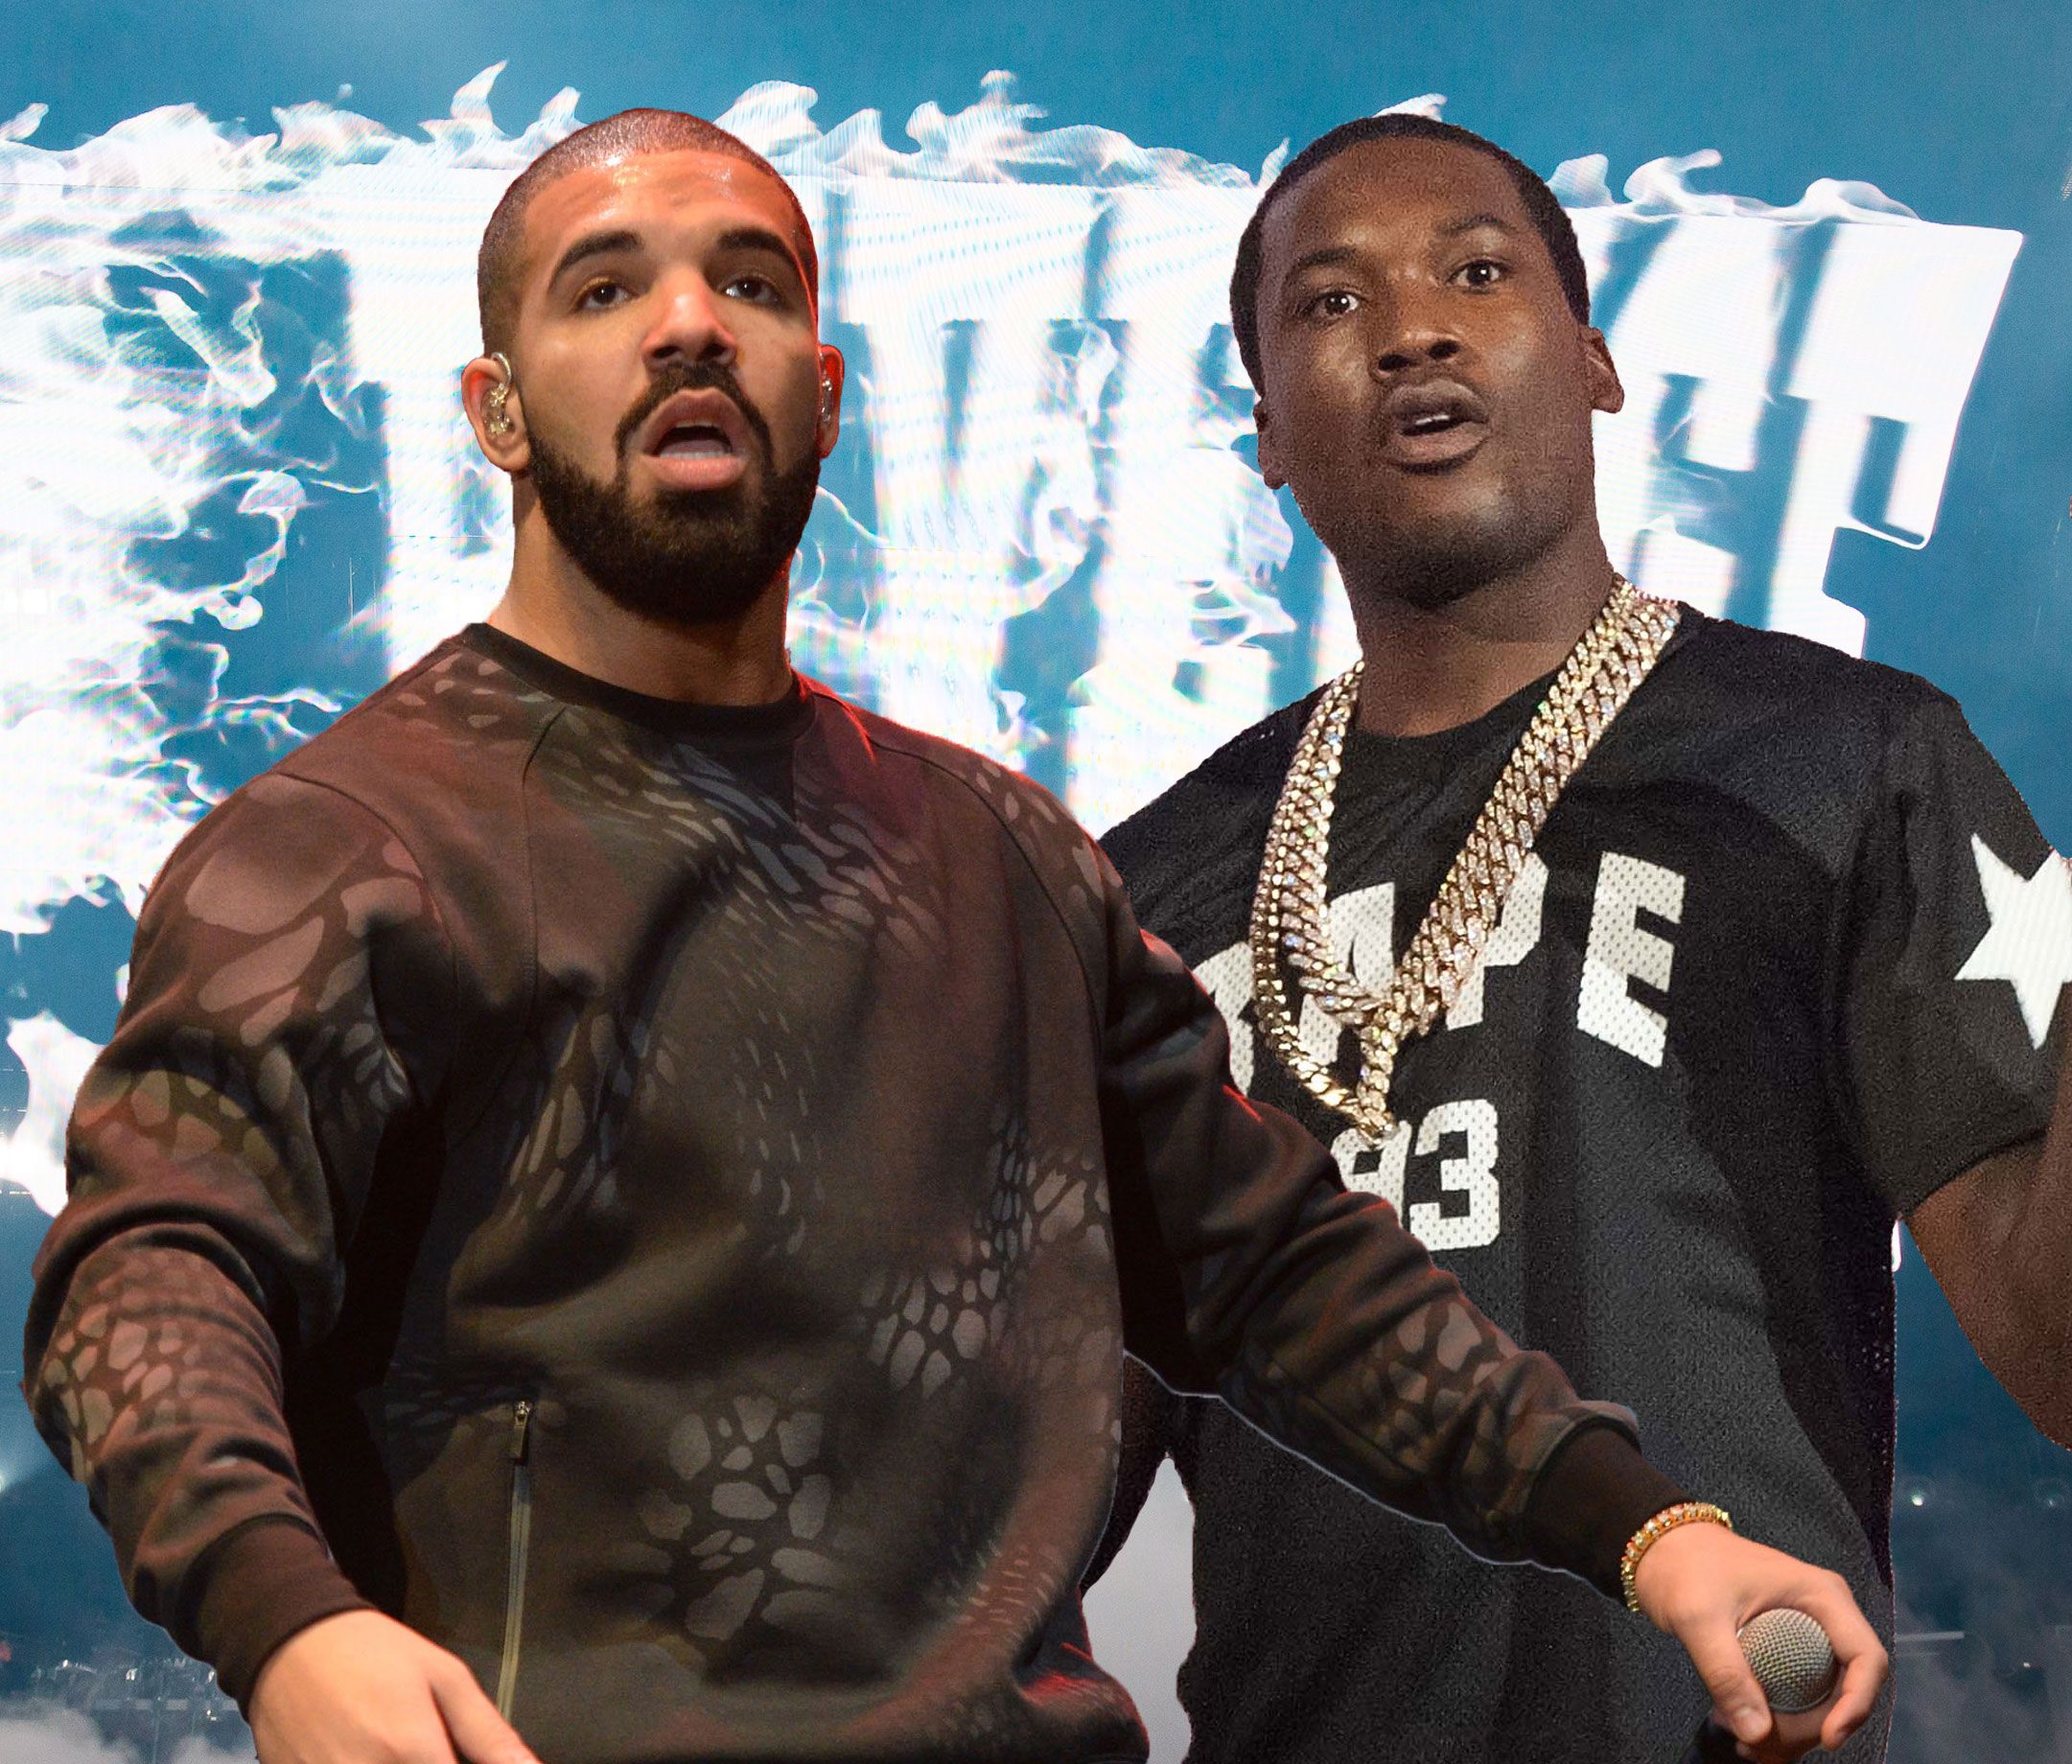 Back to Back (Meek Mill Diss) (Originally Performed By Drake